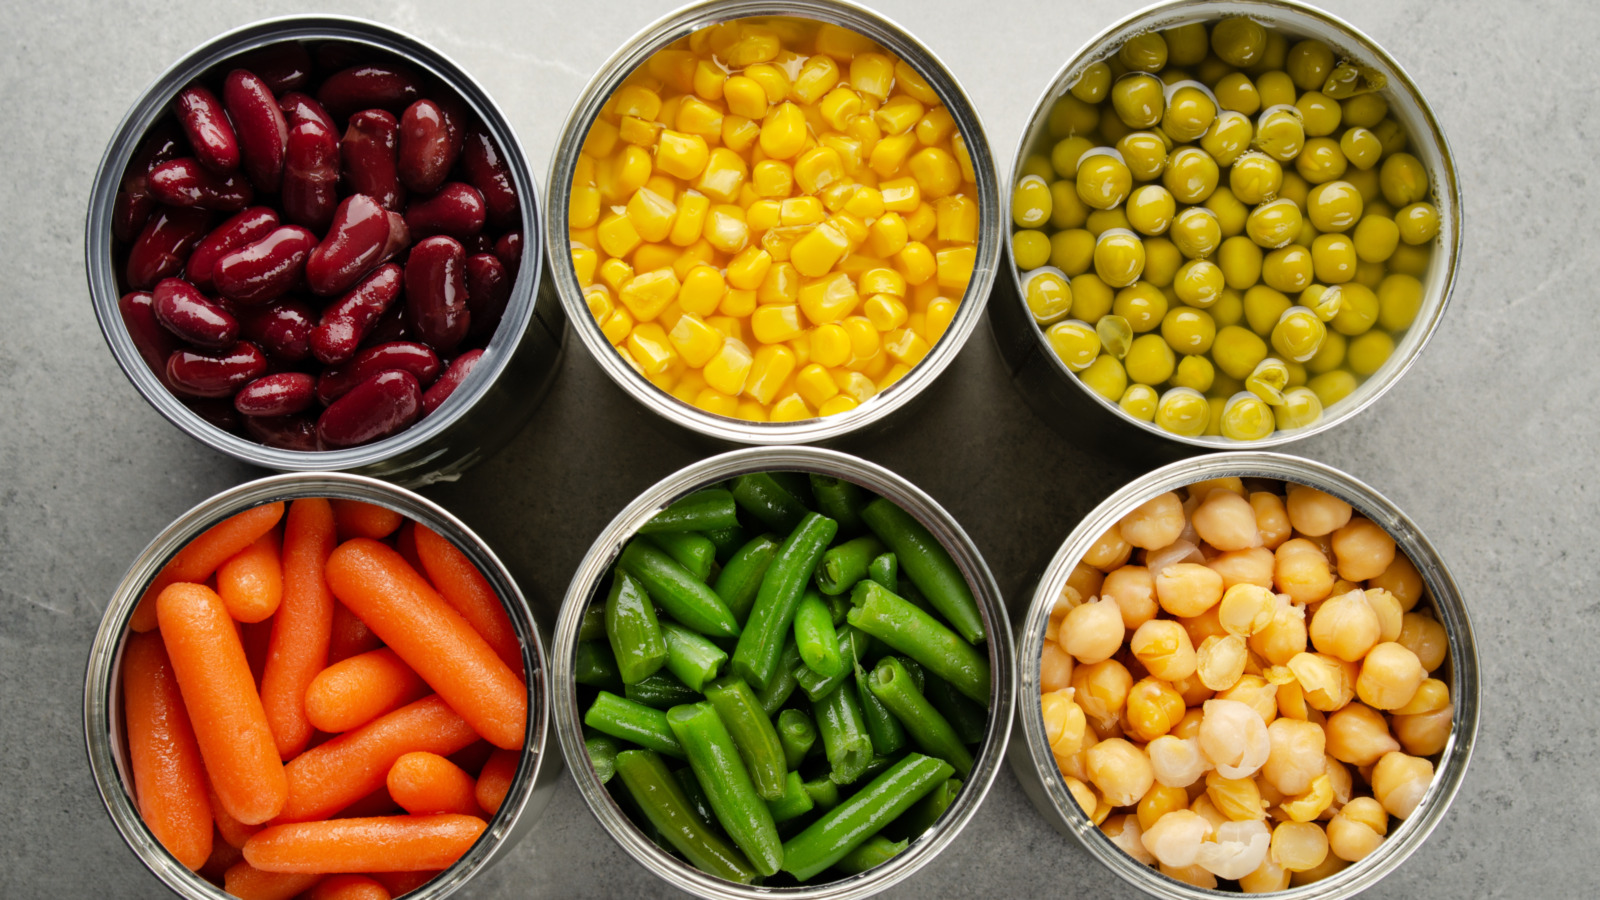 The Simple Hack For Getting The Most Out Of Canned Foods